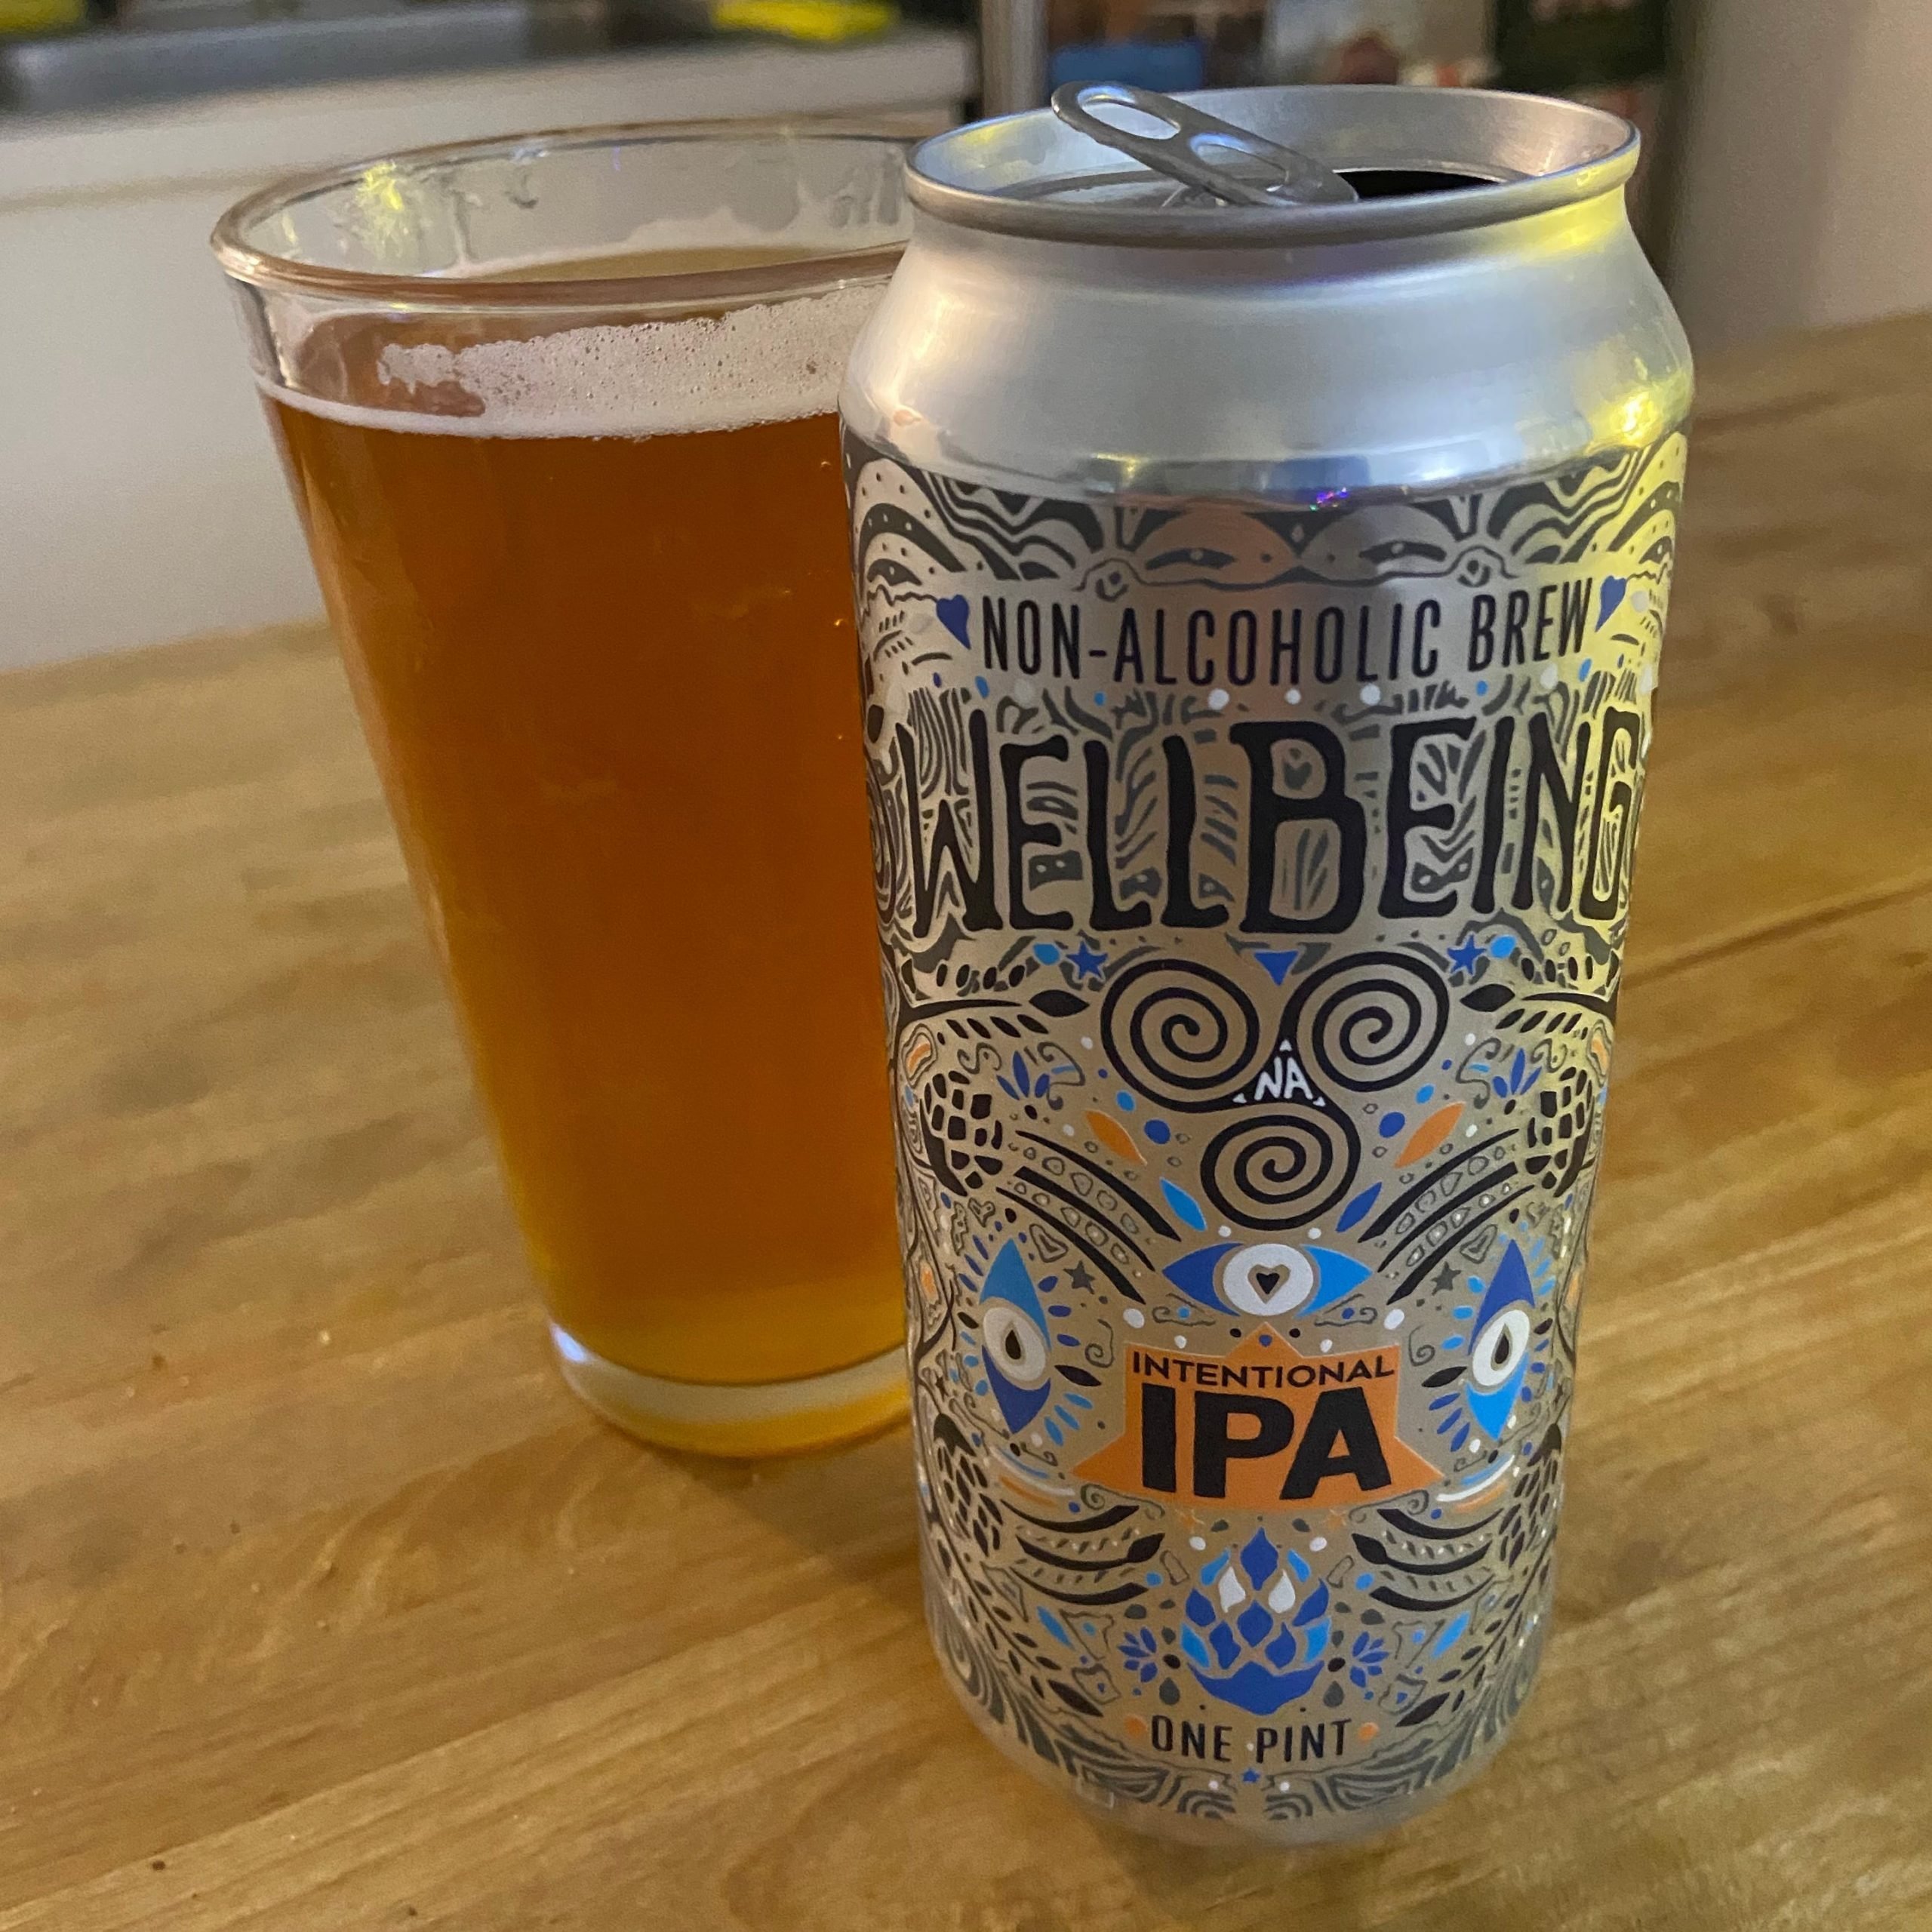 Wellbeing alcohol-free beer